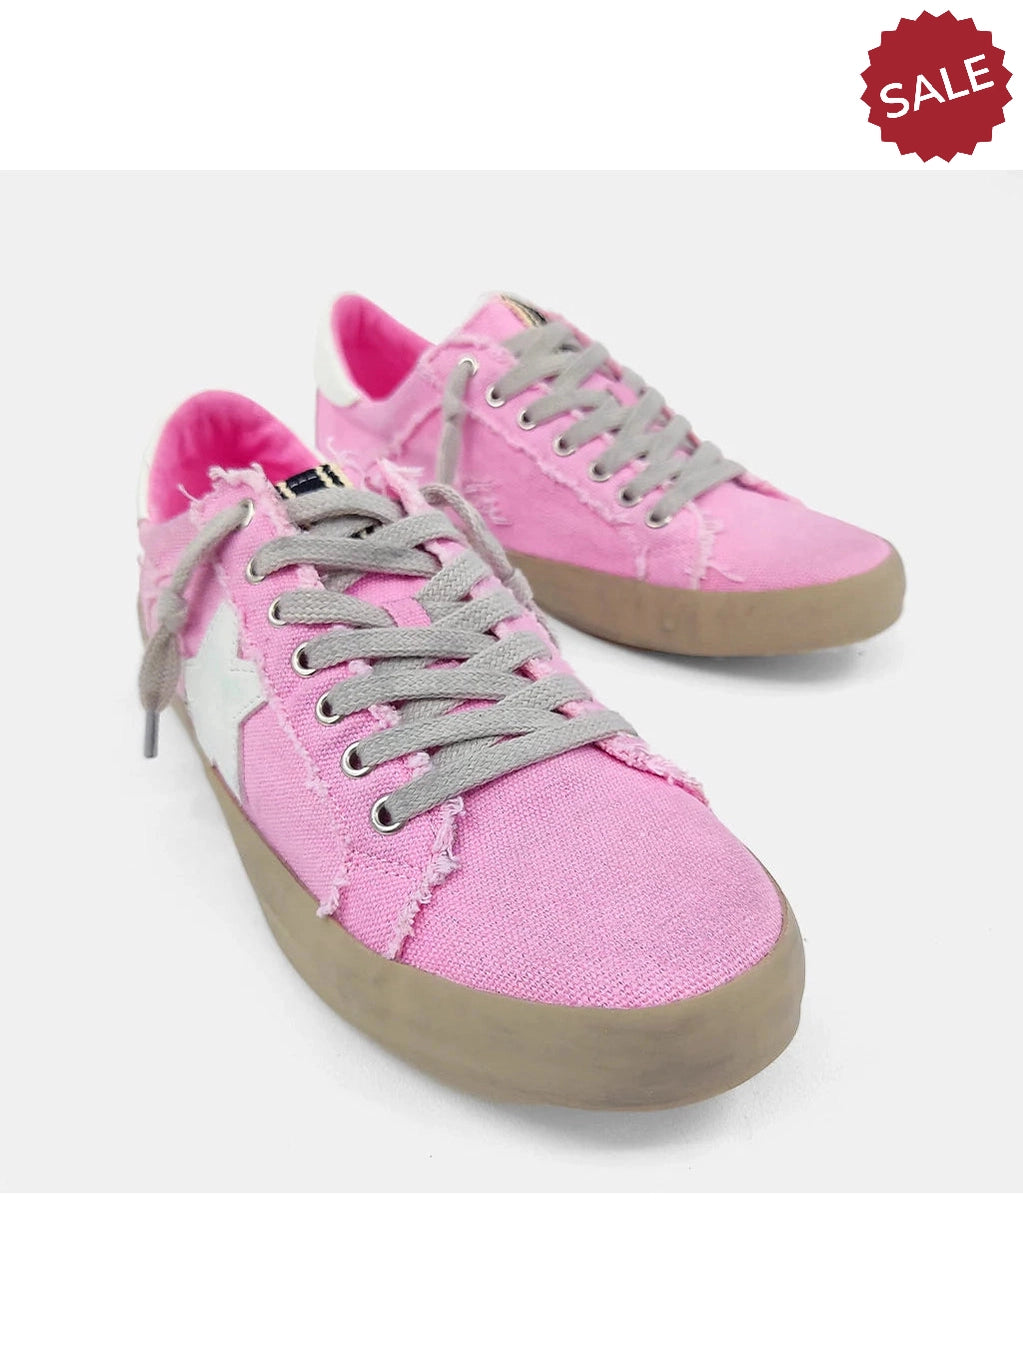 THE PAULA PINK STAR CANVAS SNEAKERS